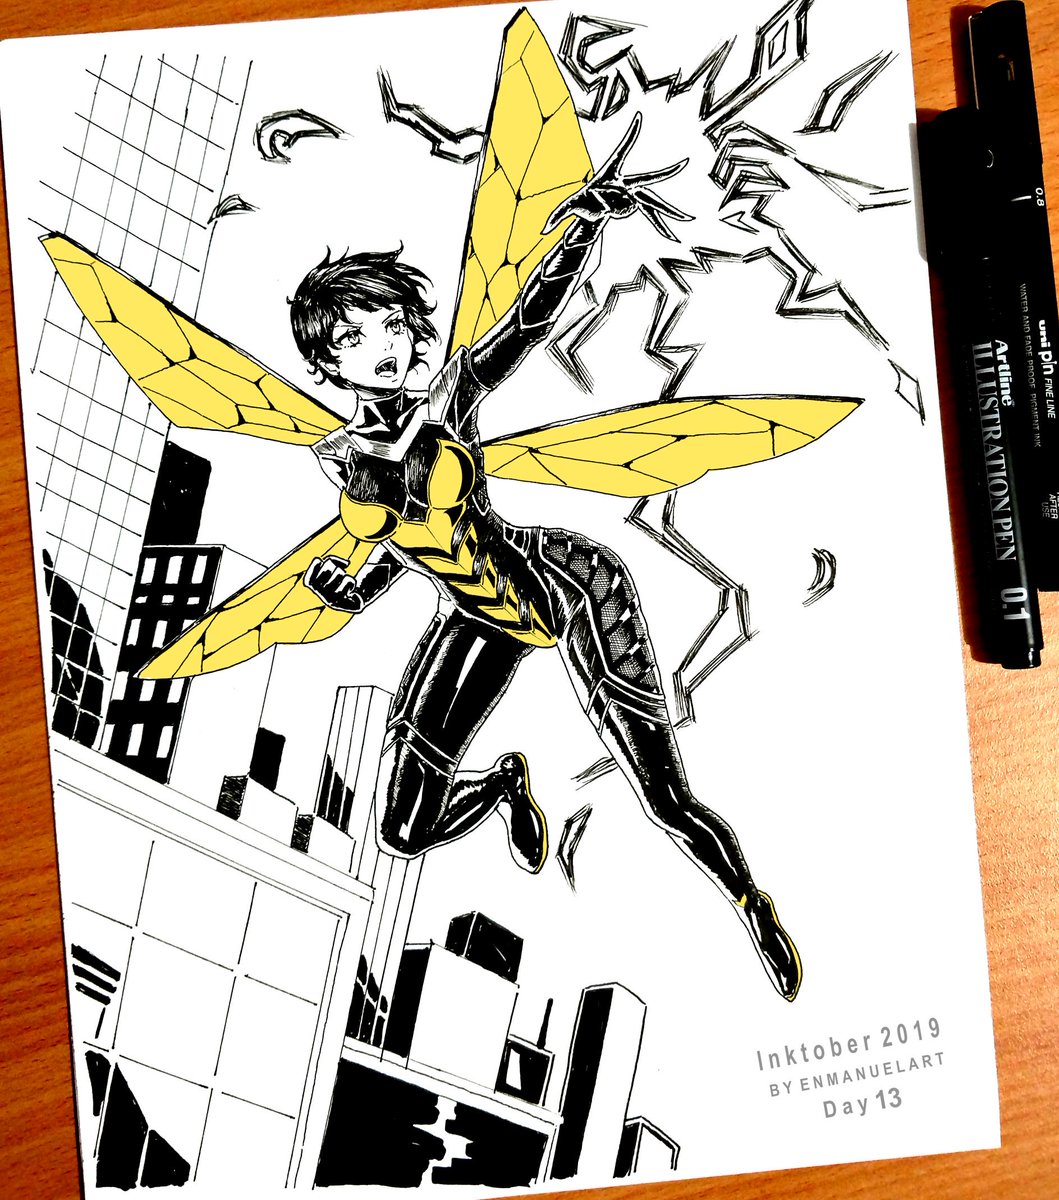 Inktober 2019 day 13 "Wasp".
I was trying to make it look like a comic cover but I have zero experience with that ? Hope you like it ? #inktober2019 #arttrober2019 #wasp #comic 